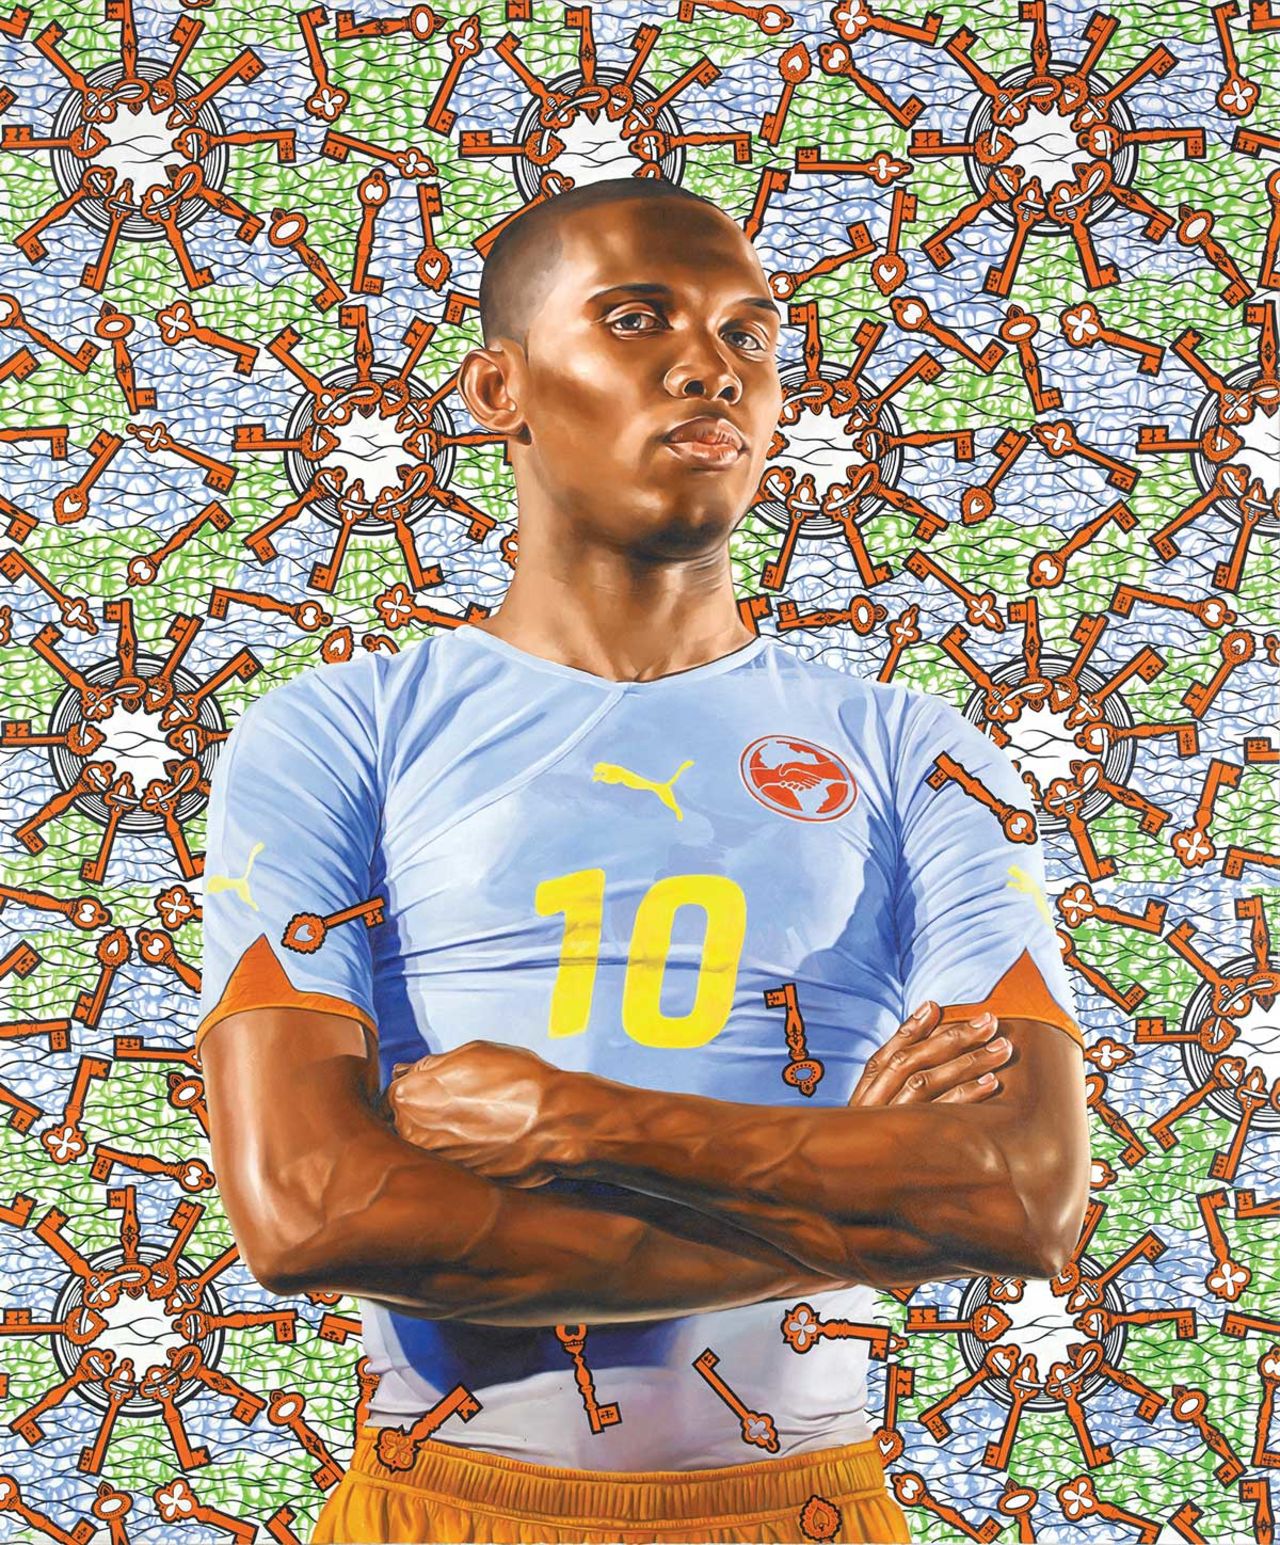 "Samuel Eto'o" (2010) by Kehinde Wiley, part of "The World's Game: Fútbol and Contemporary Art" at the Pérez Art Museum Miami